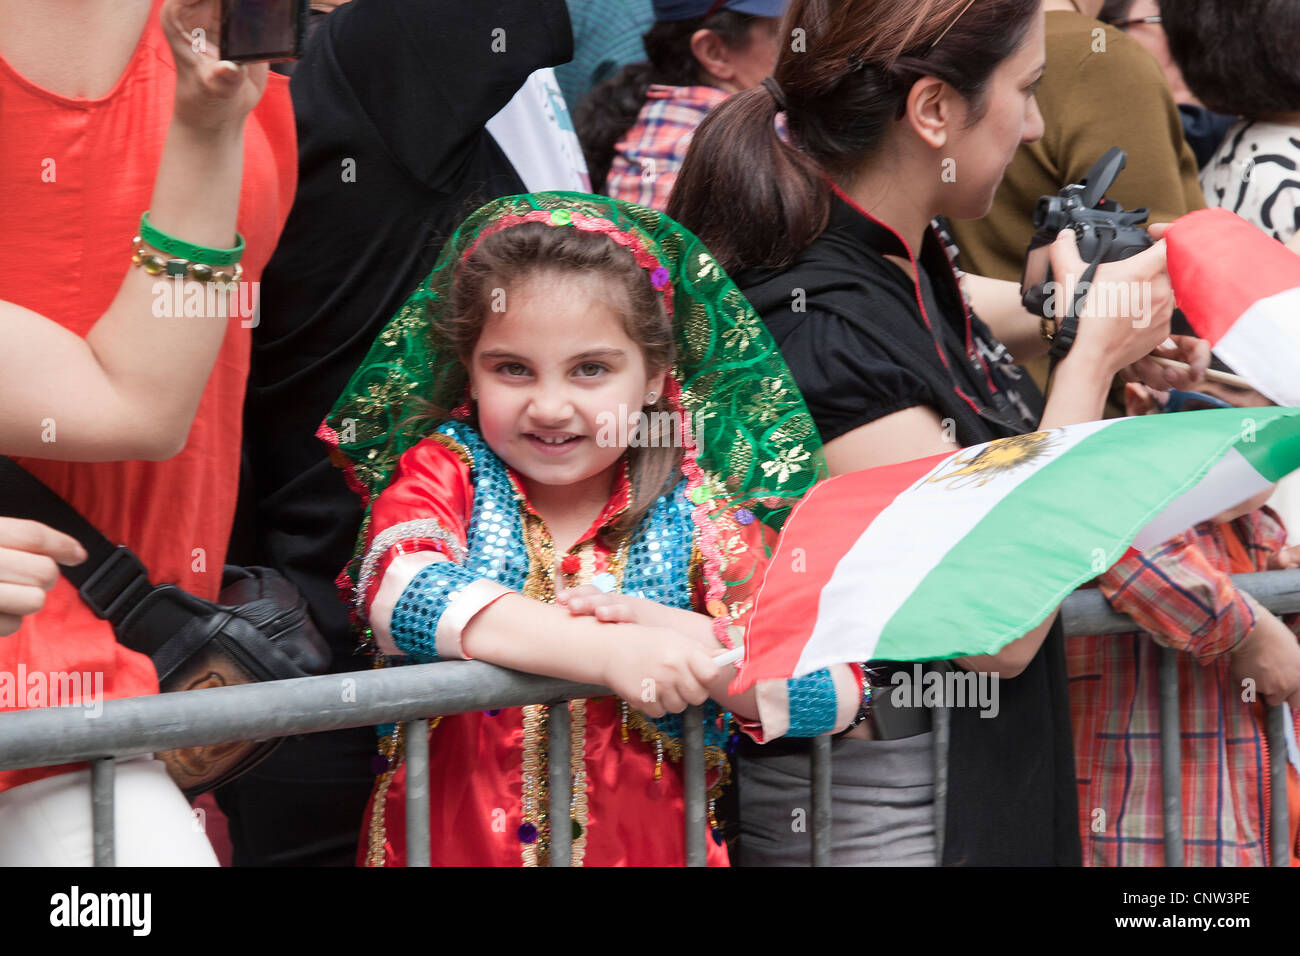 Iranian Americans celebrate the Persian New Year Nowruz with the annual ...